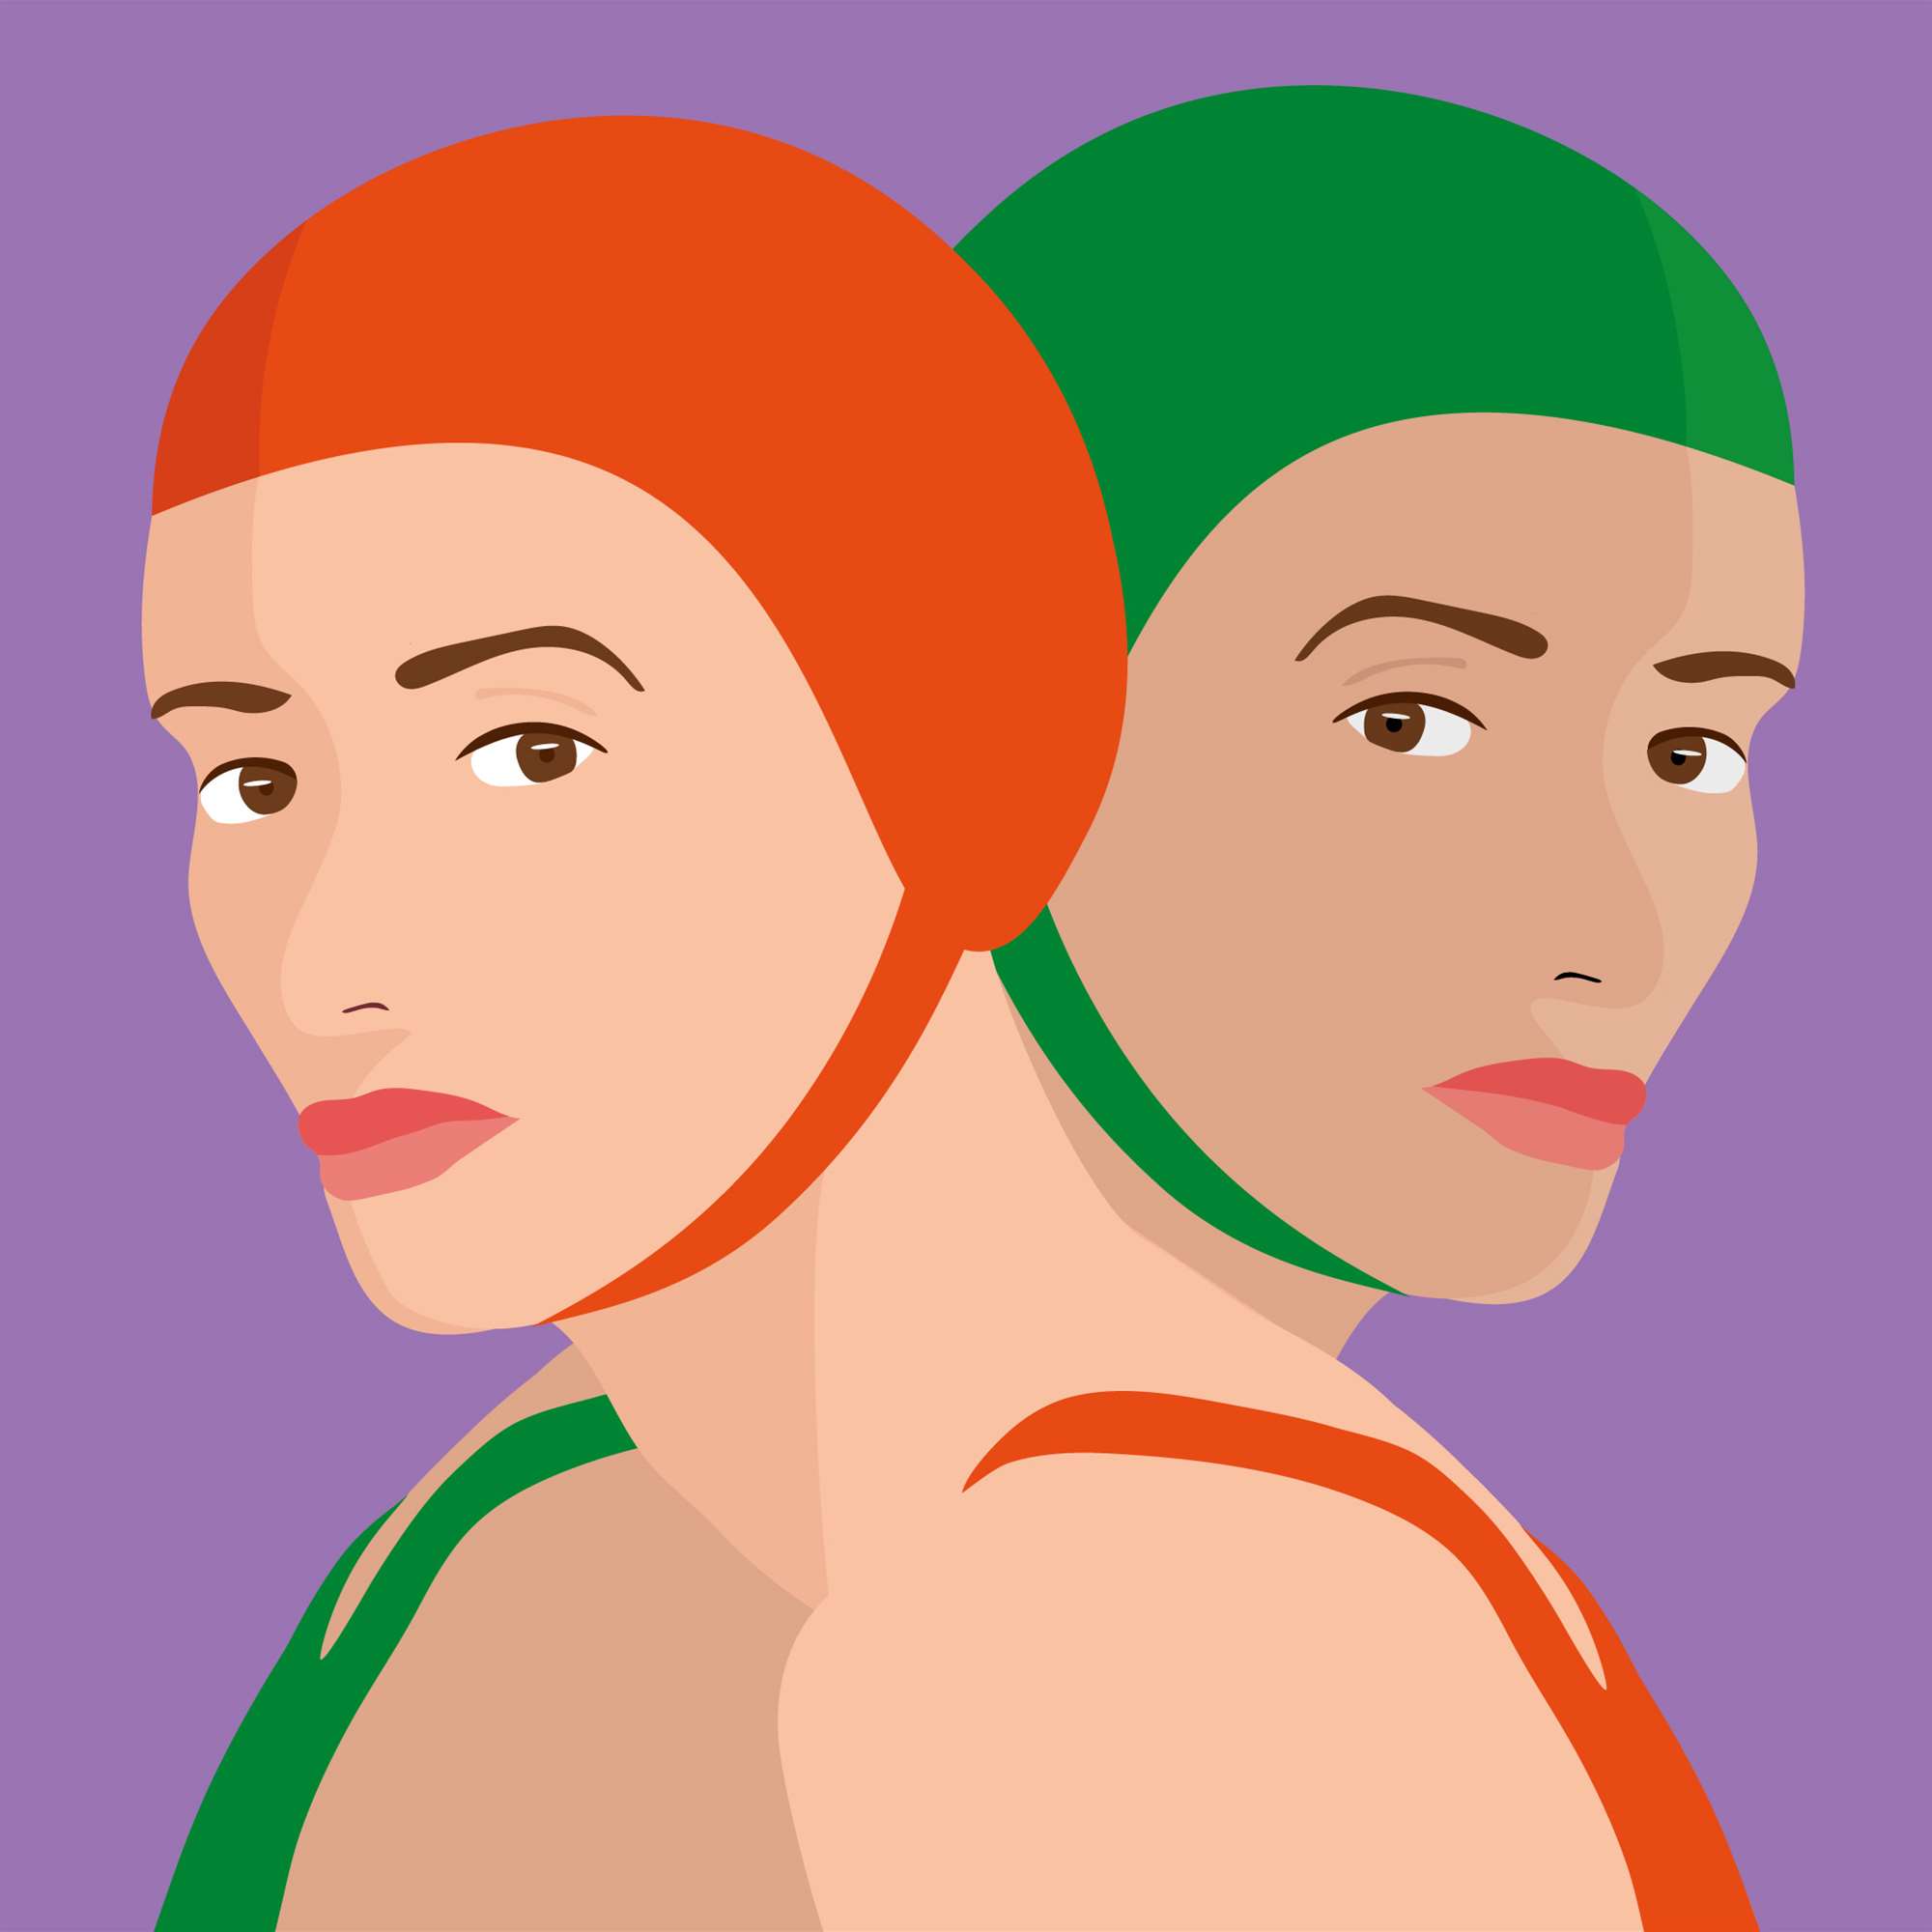 Camila Pinheiro, Bright vector fashion illustration of 2 swimmers in swimming hats, striking composition.